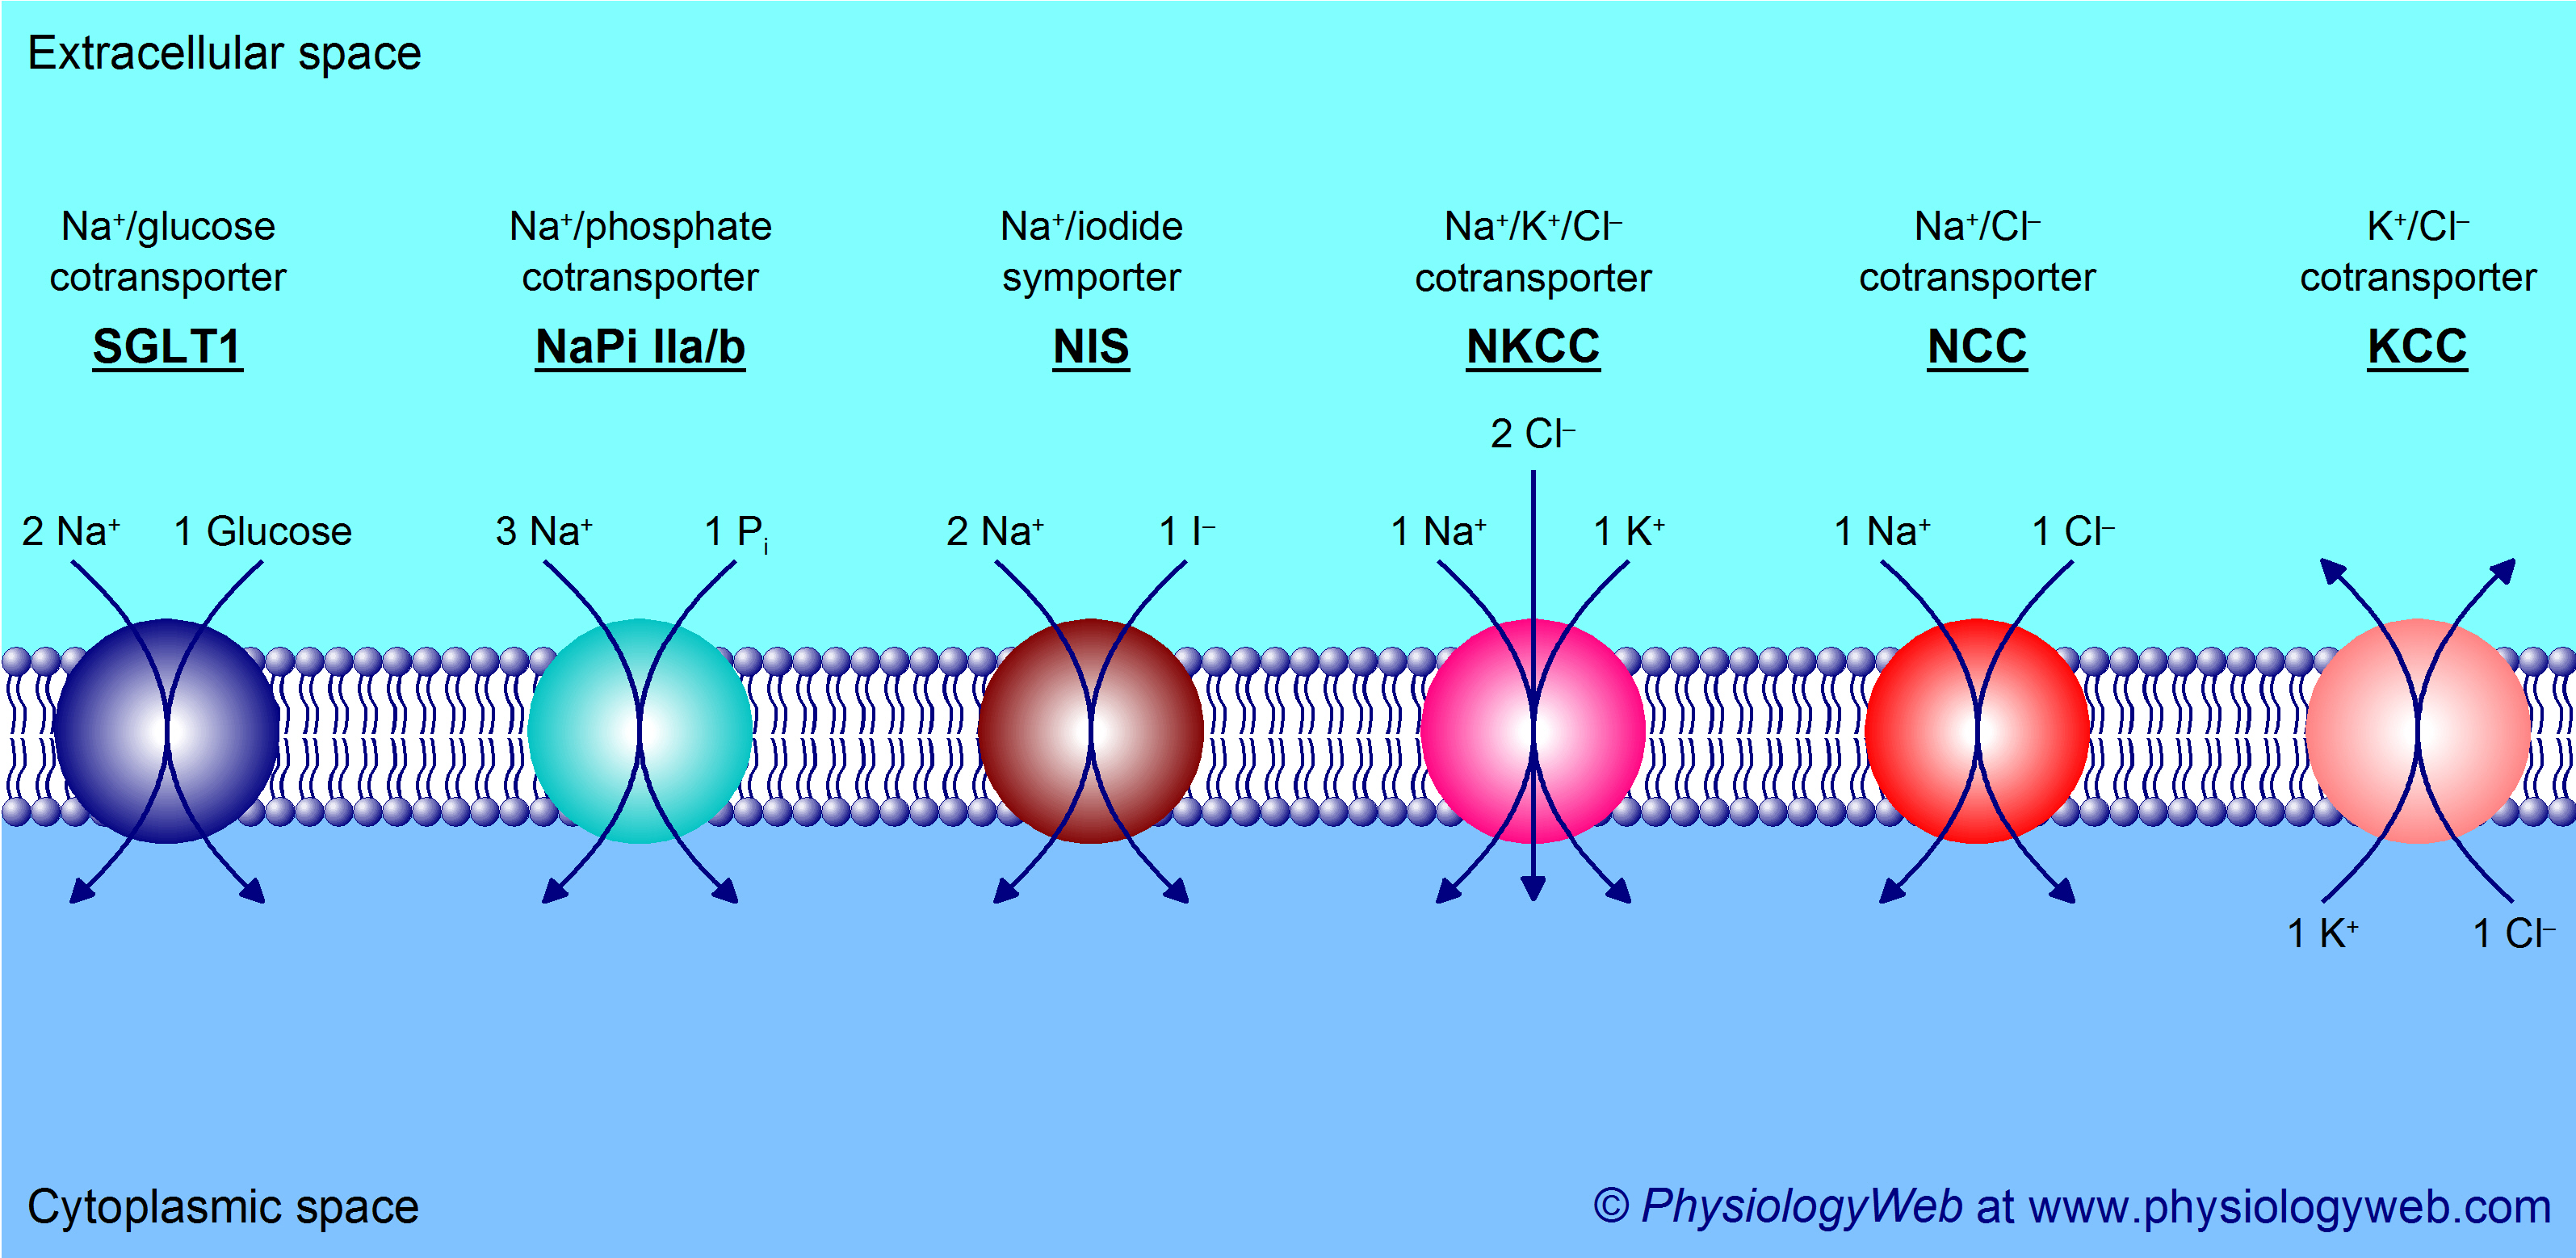 Secondary active transport - Examples of cotransporters (symporters)